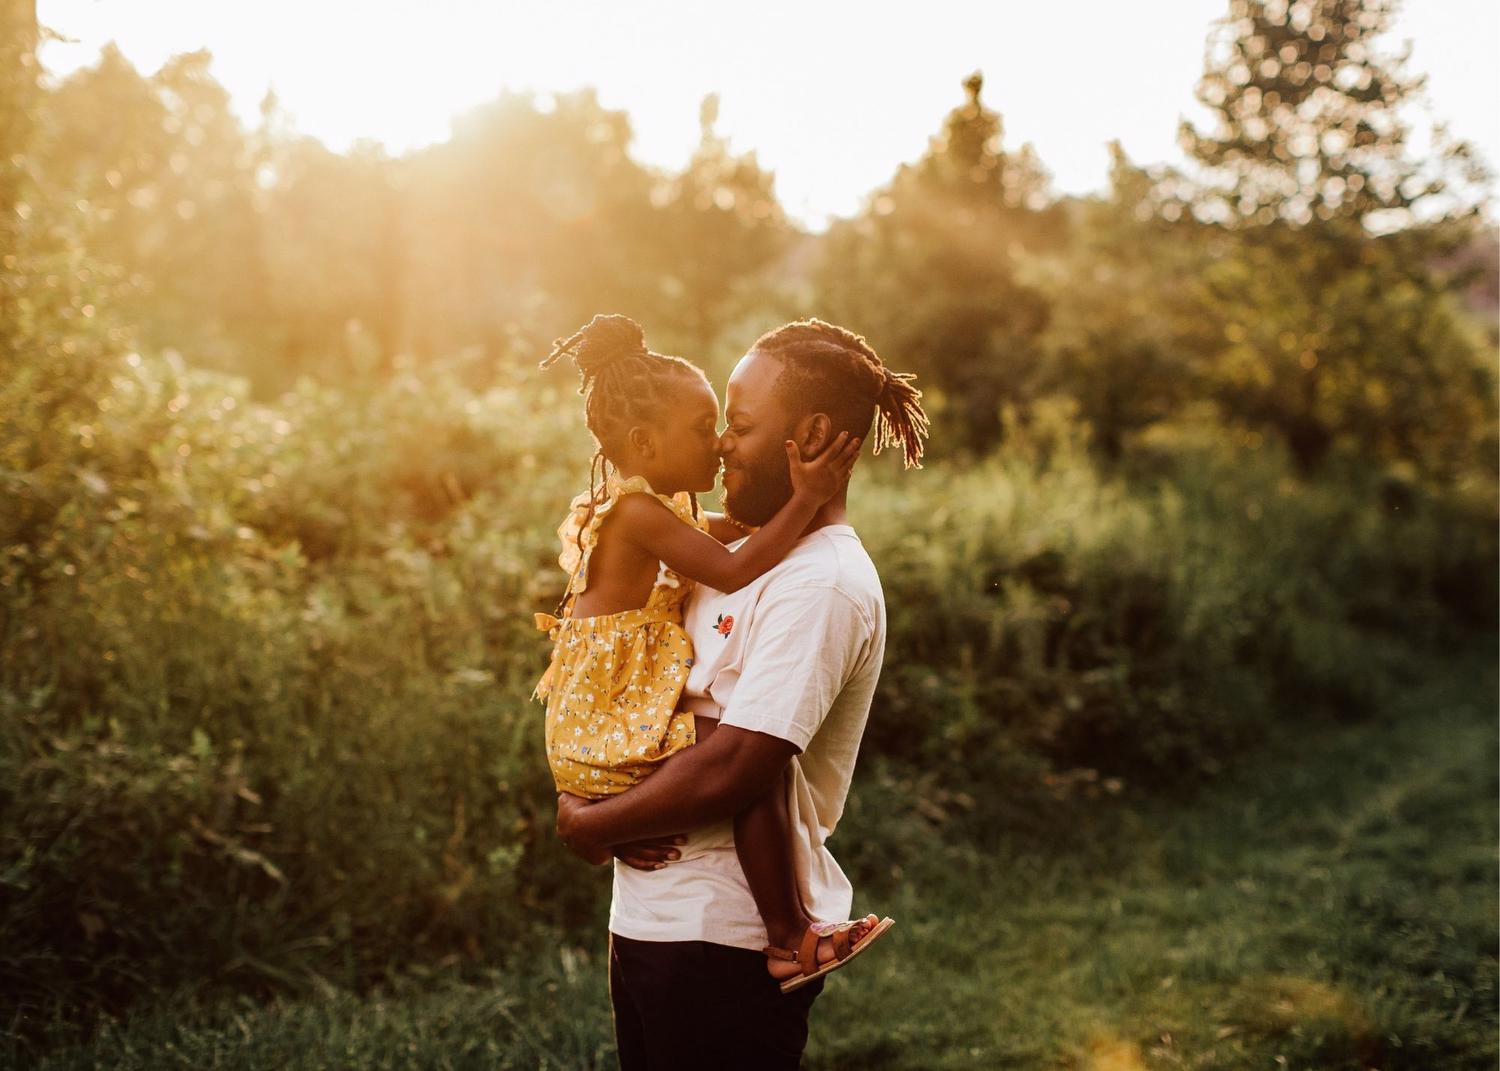 Man holding young girl; he is smiling while she rubs her nose against his outdoors with the sun behind